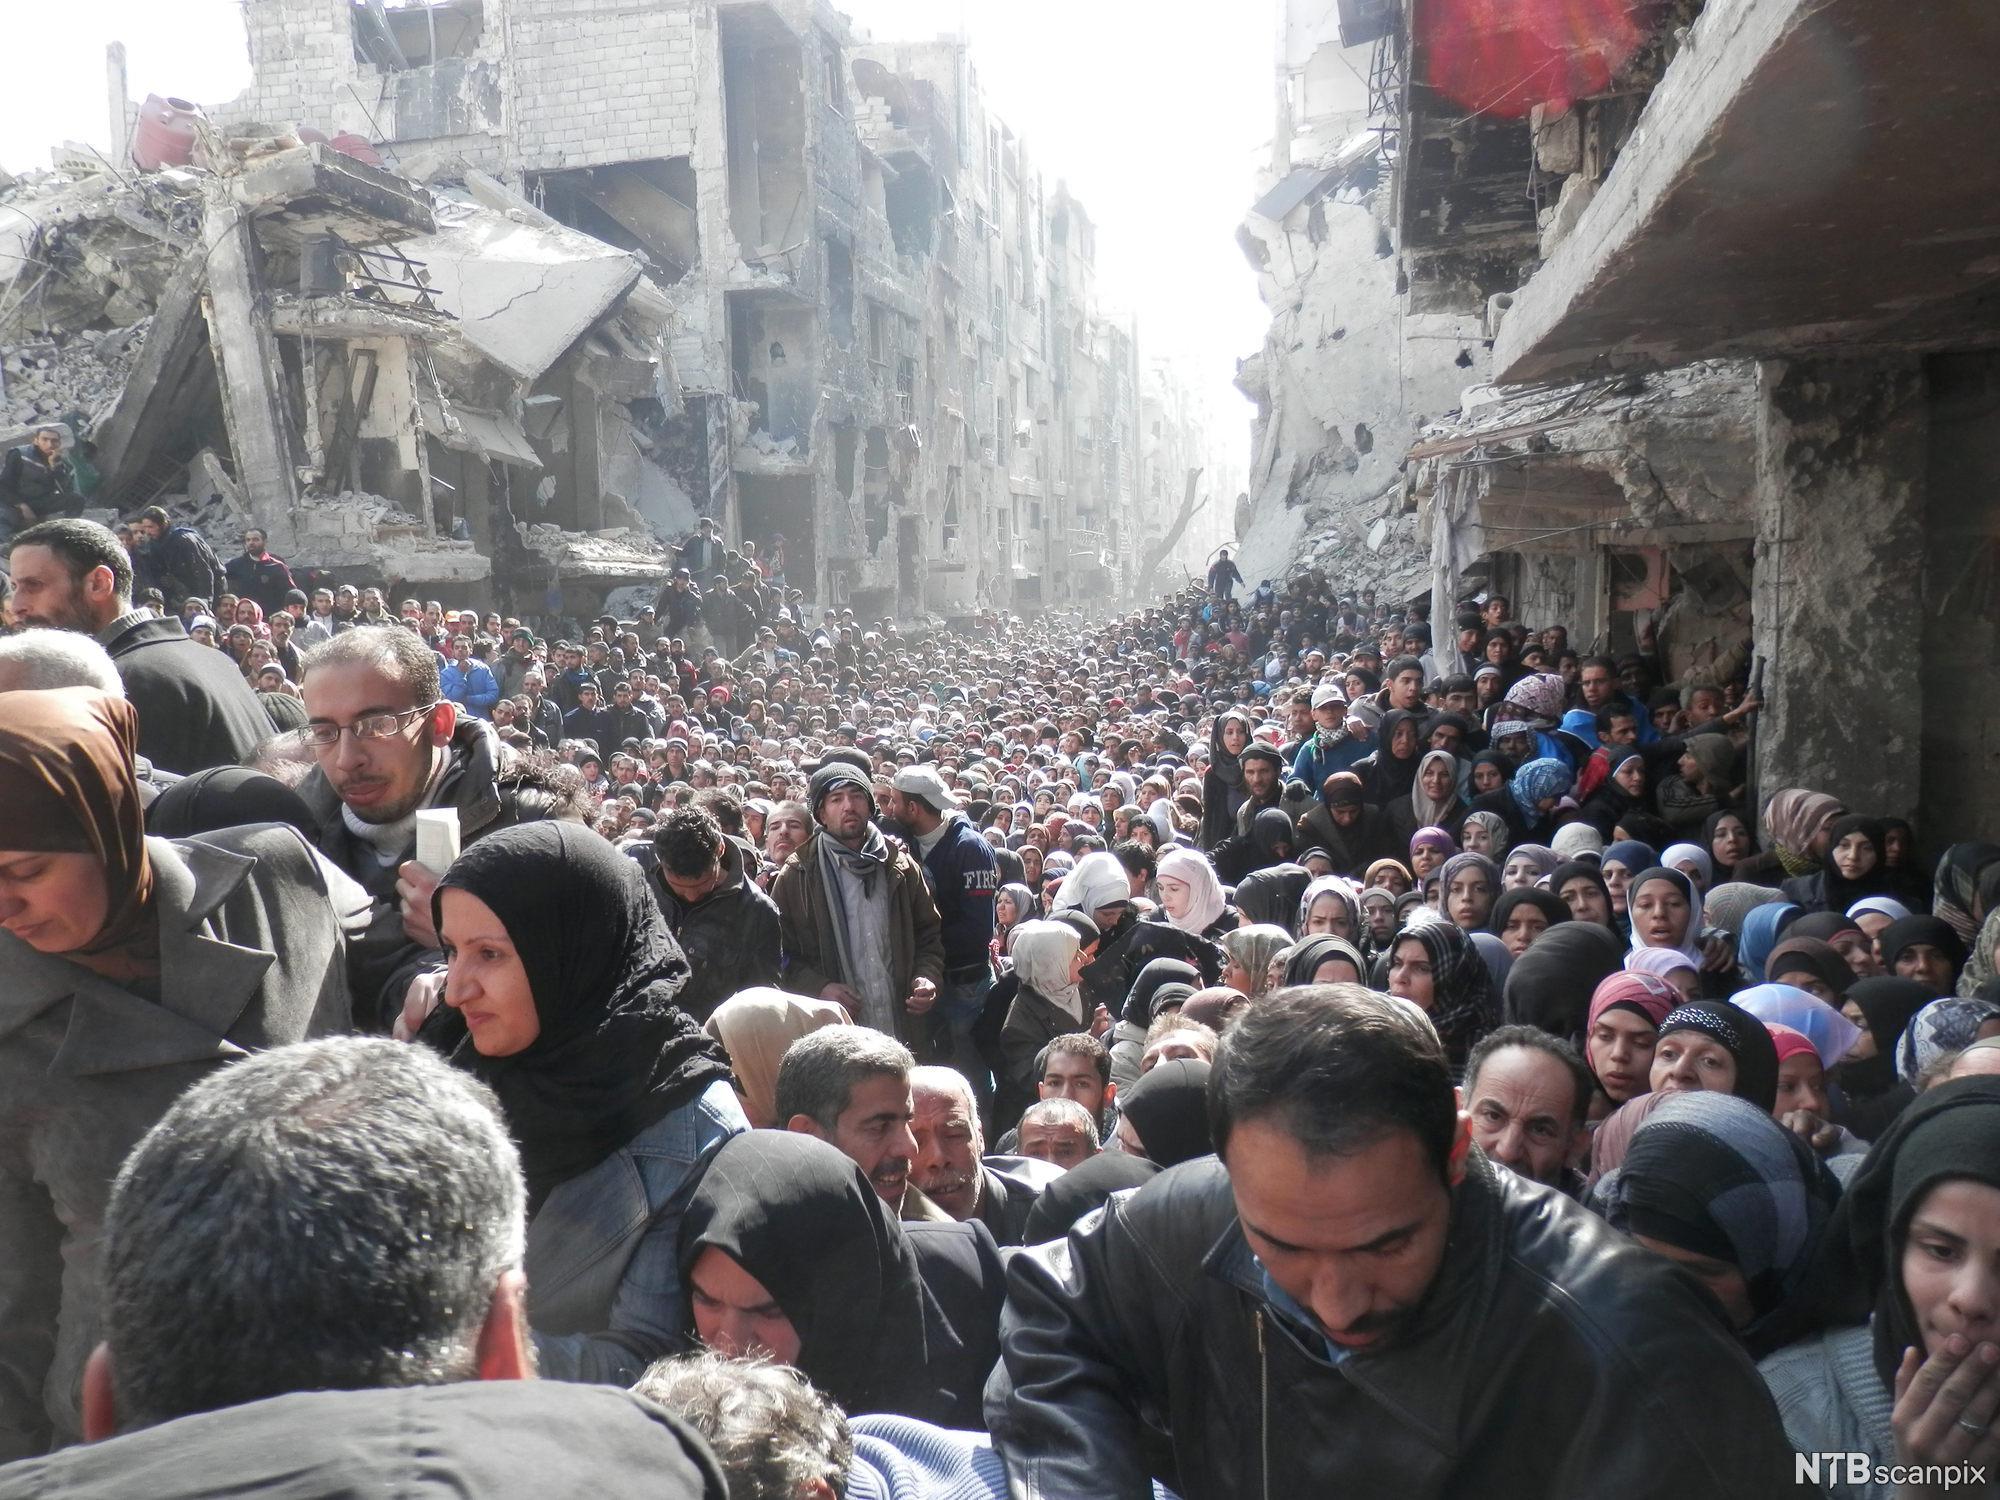 A very large crowd of Palestinian refugees massing in a street in a war-shattered district of the Syrian capital